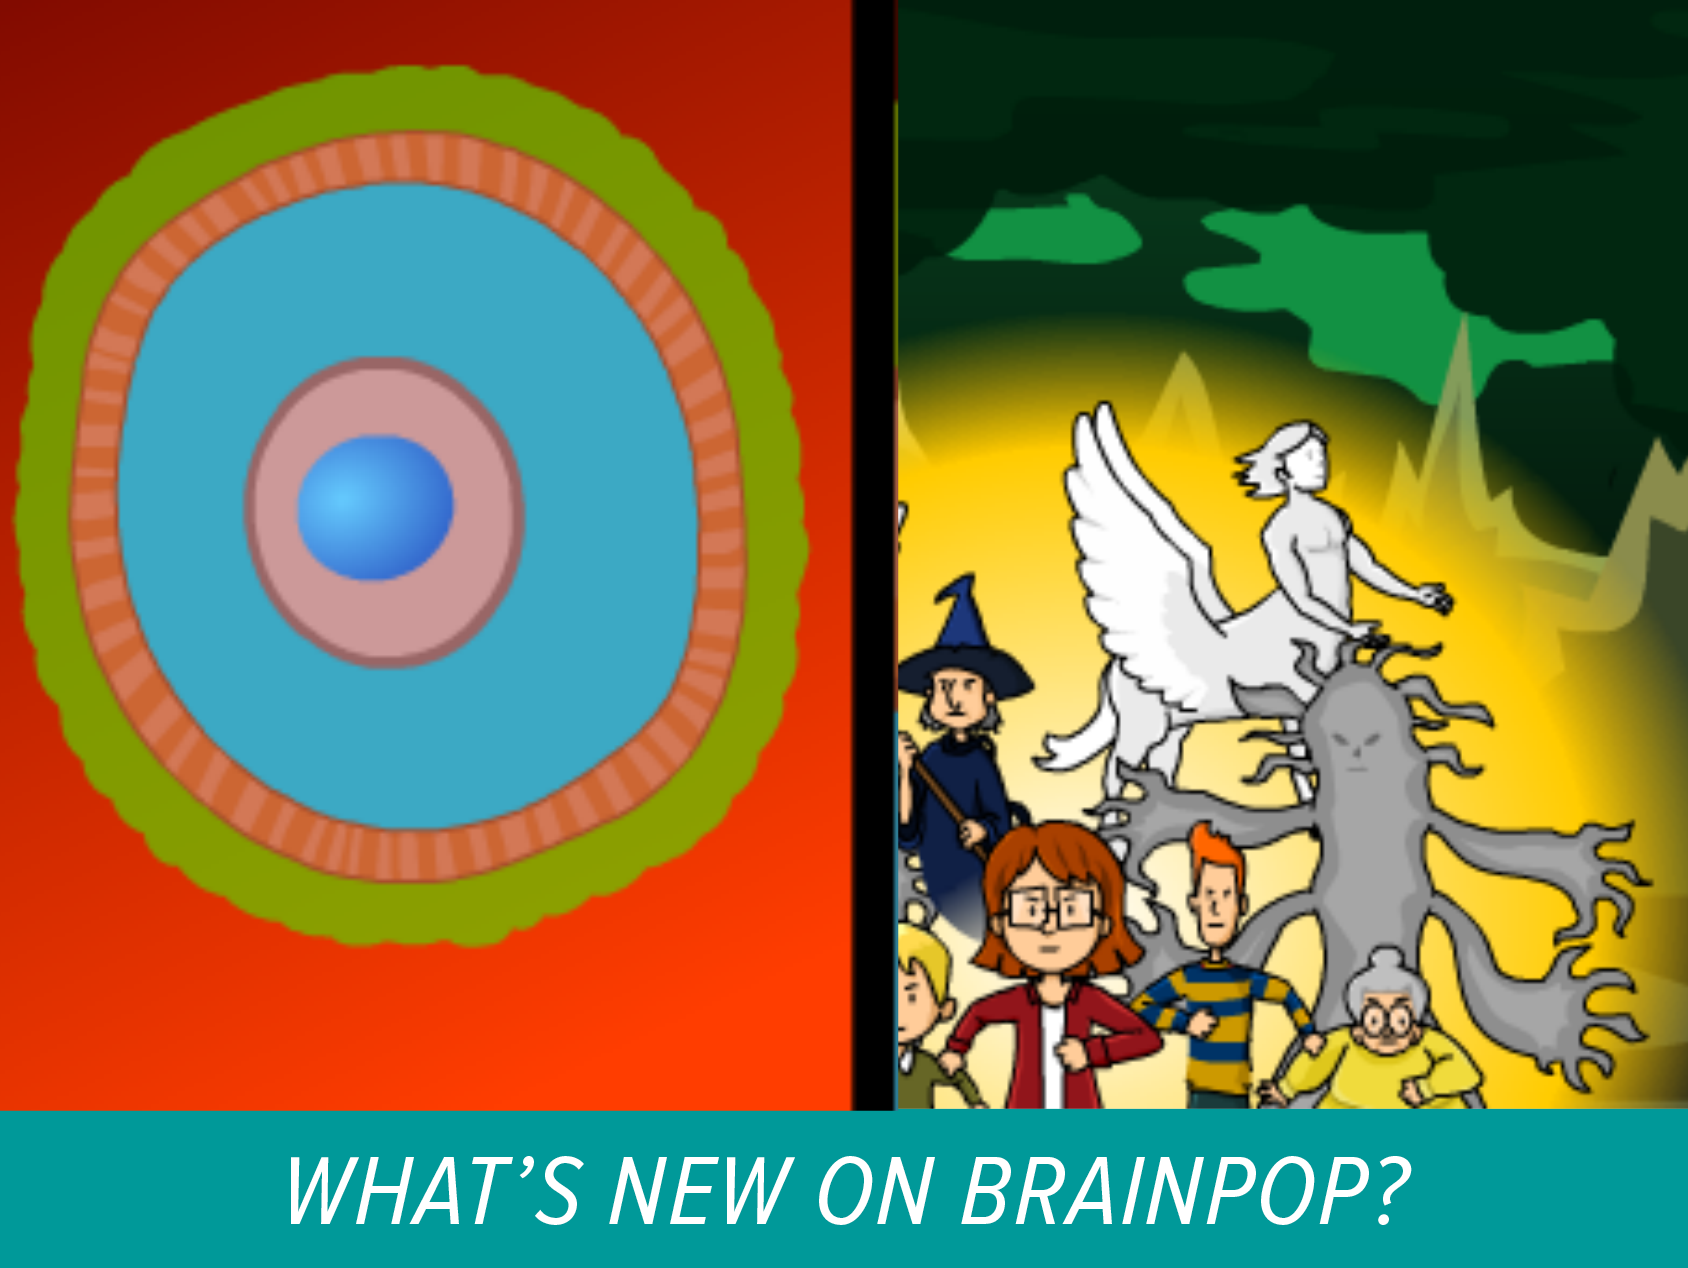 Two new movies now on BrainPOP